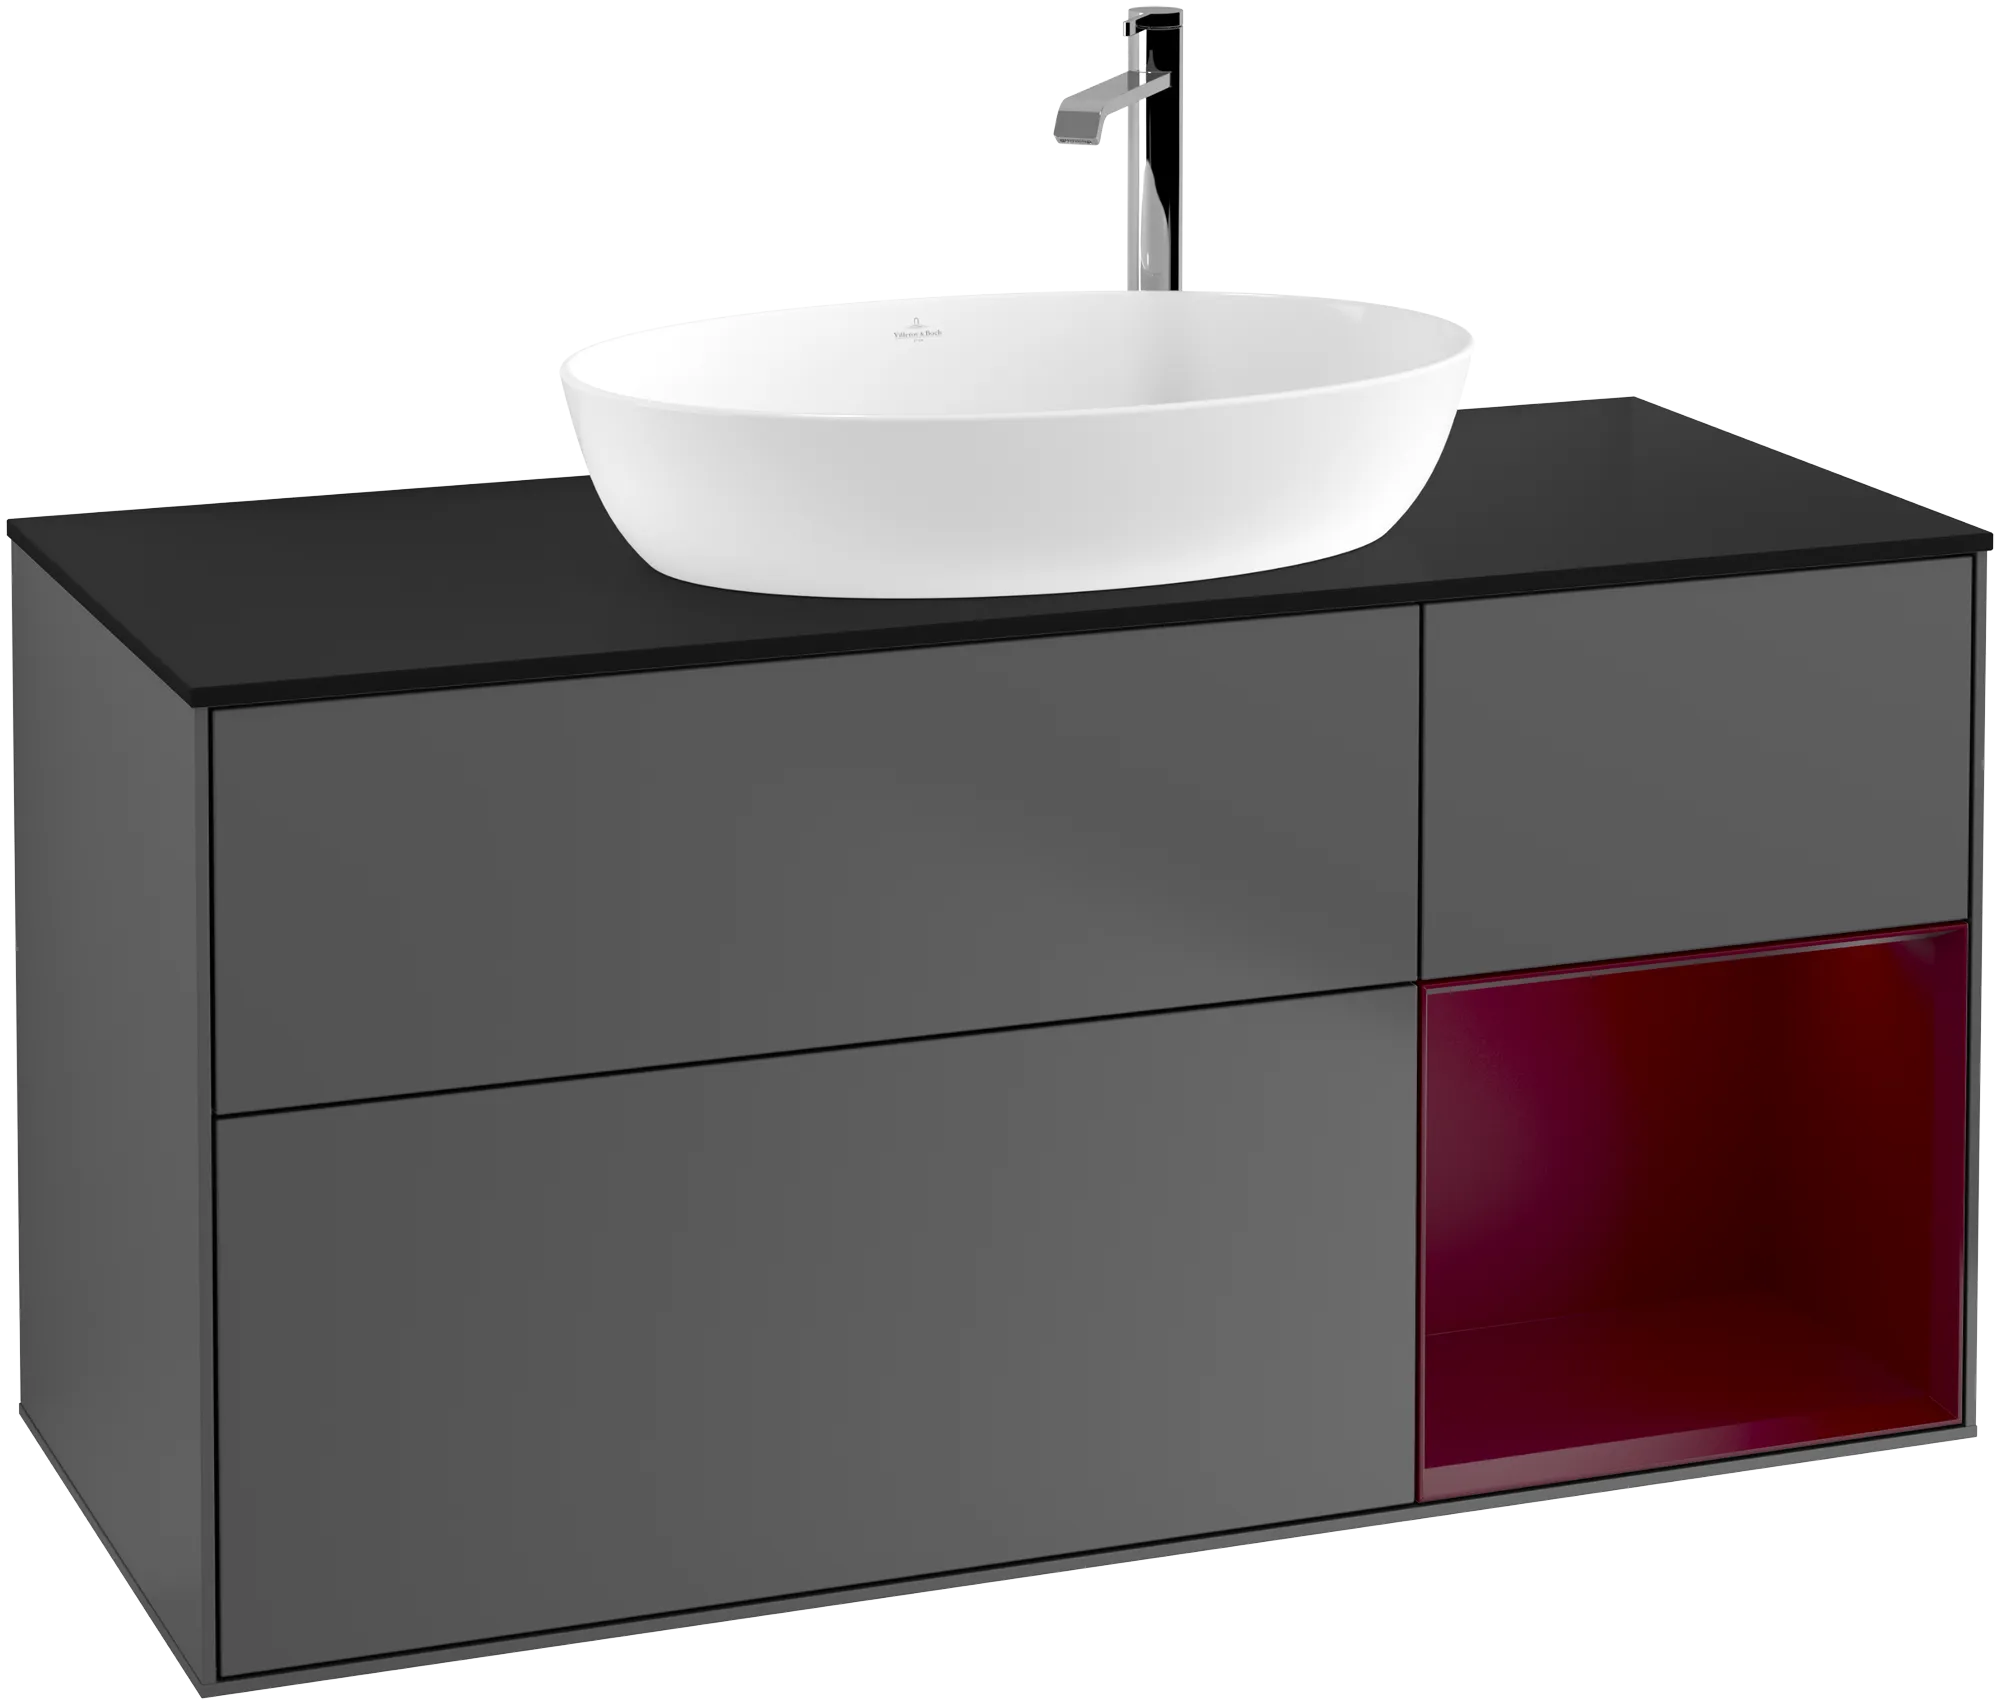 VILLEROY BOCH Finion Vanity unit, with lighting, 3 pull-out compartments, 1200 x 603 x 501 mm, Anthracite Matt Lacquer / Peony Matt Lacquer / Glass Black Matt #G952HBGK resmi